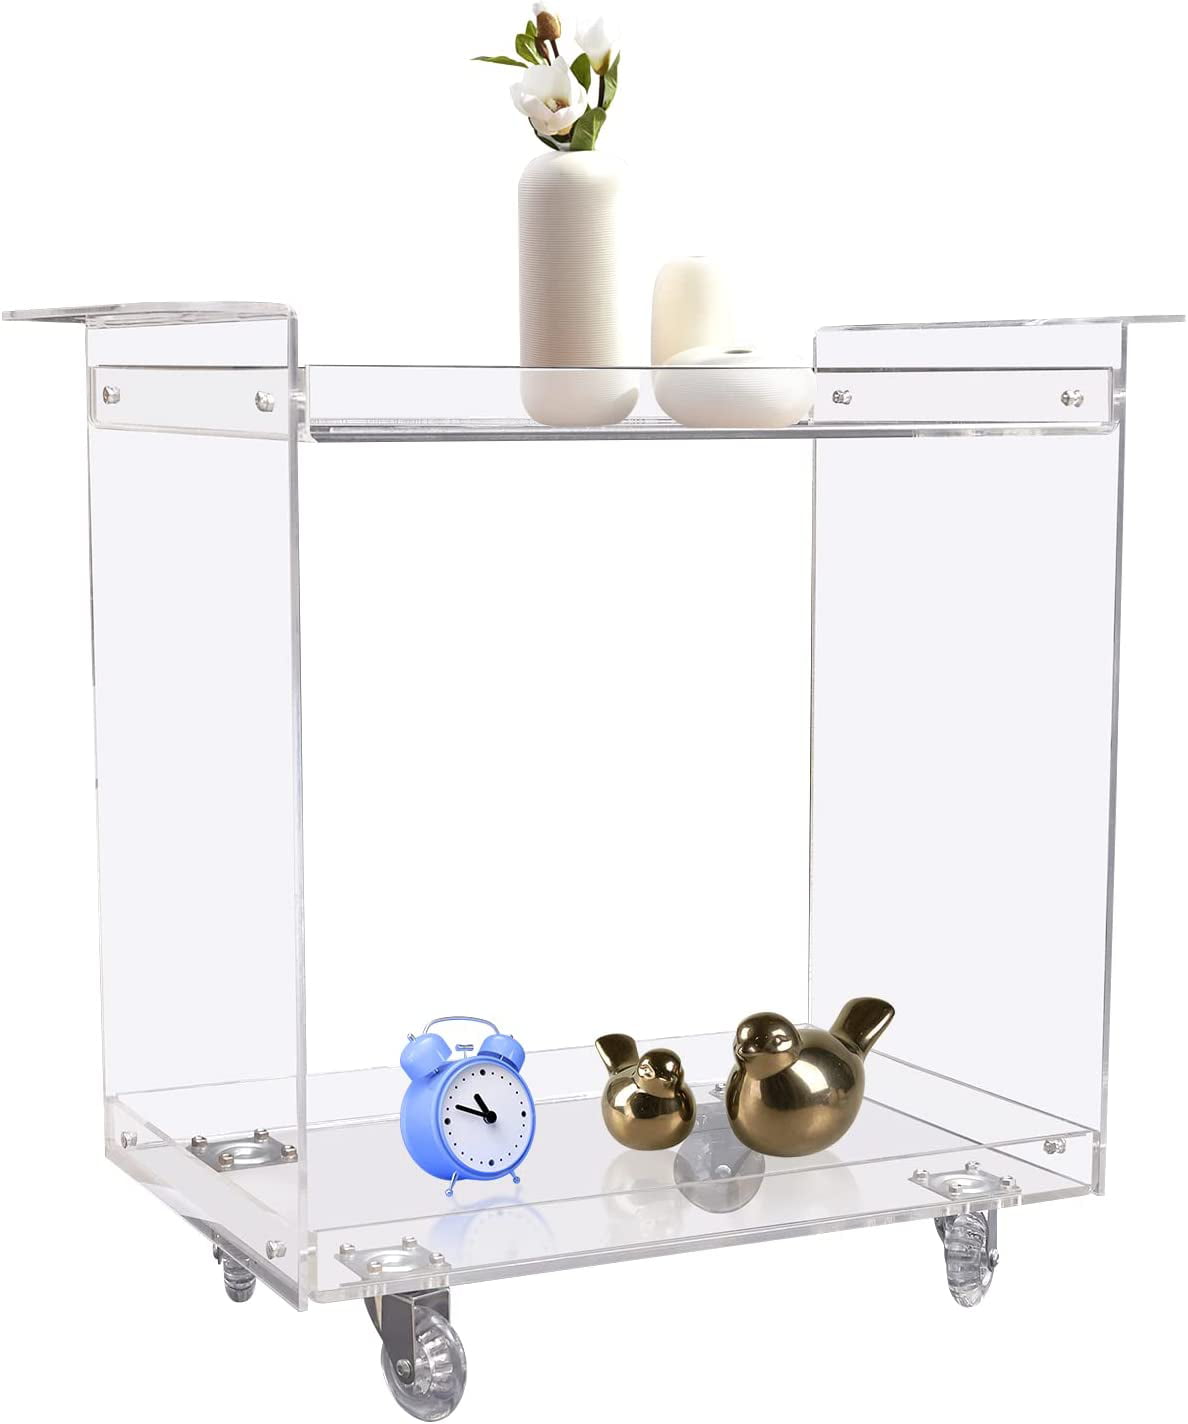 MIDUO 2-Tier Utility Rolling Cart for Home Acrylic Storage Cart Clear Multifunction Storage Cart On Wheels